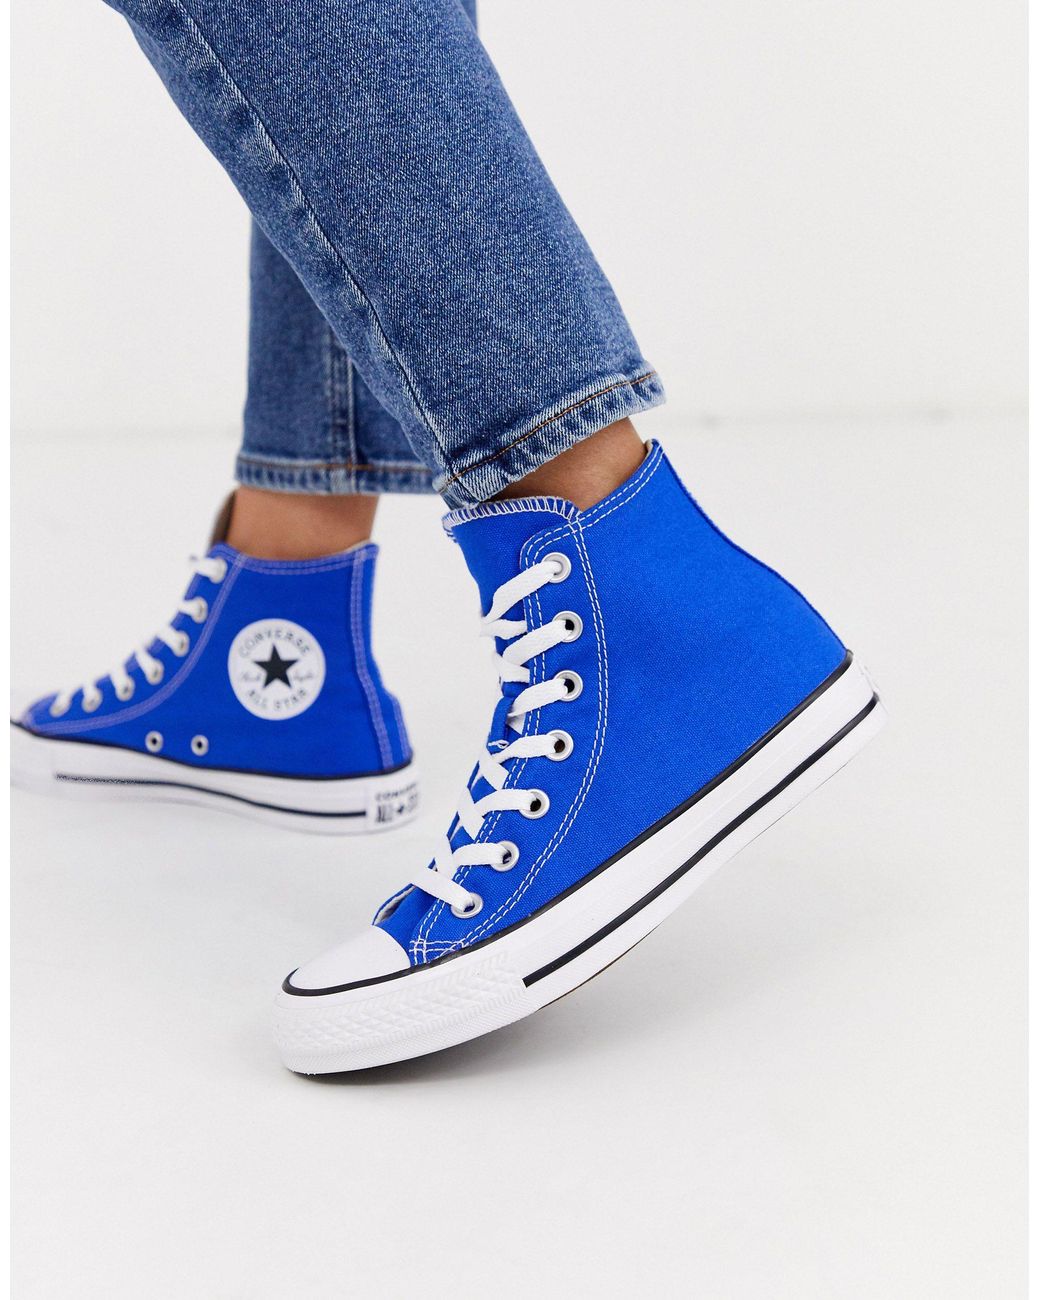 Converse Chuck Taylor All Star - Hoge Kobaltblauwe Sneakers in Blauw | Lyst NL